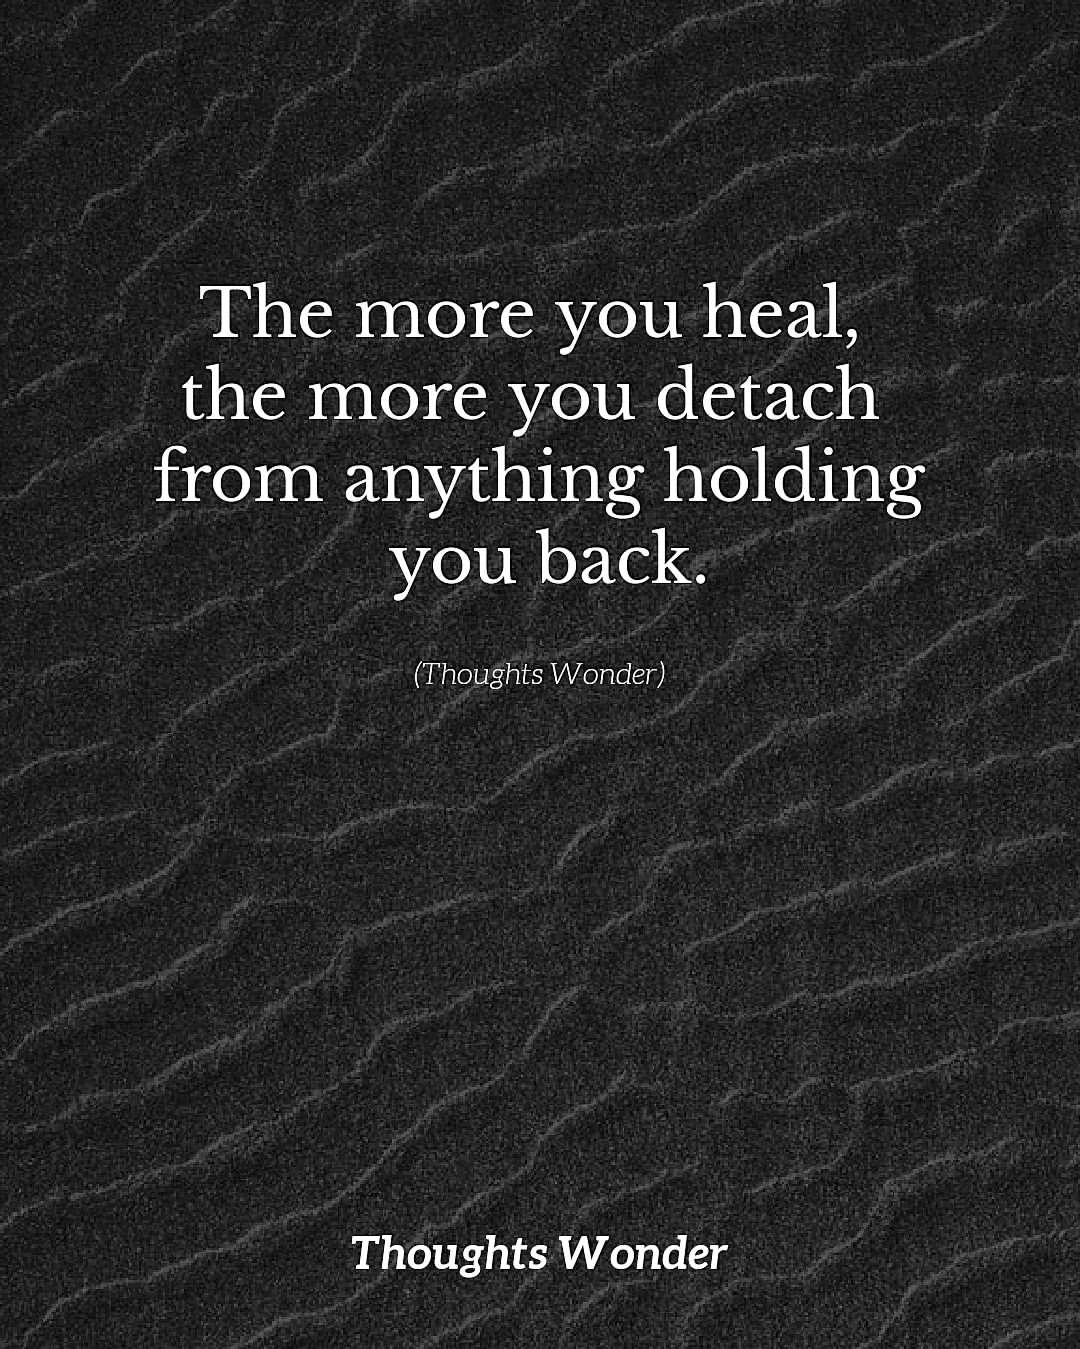 The more you heal, the more you detach from anything holding you back.